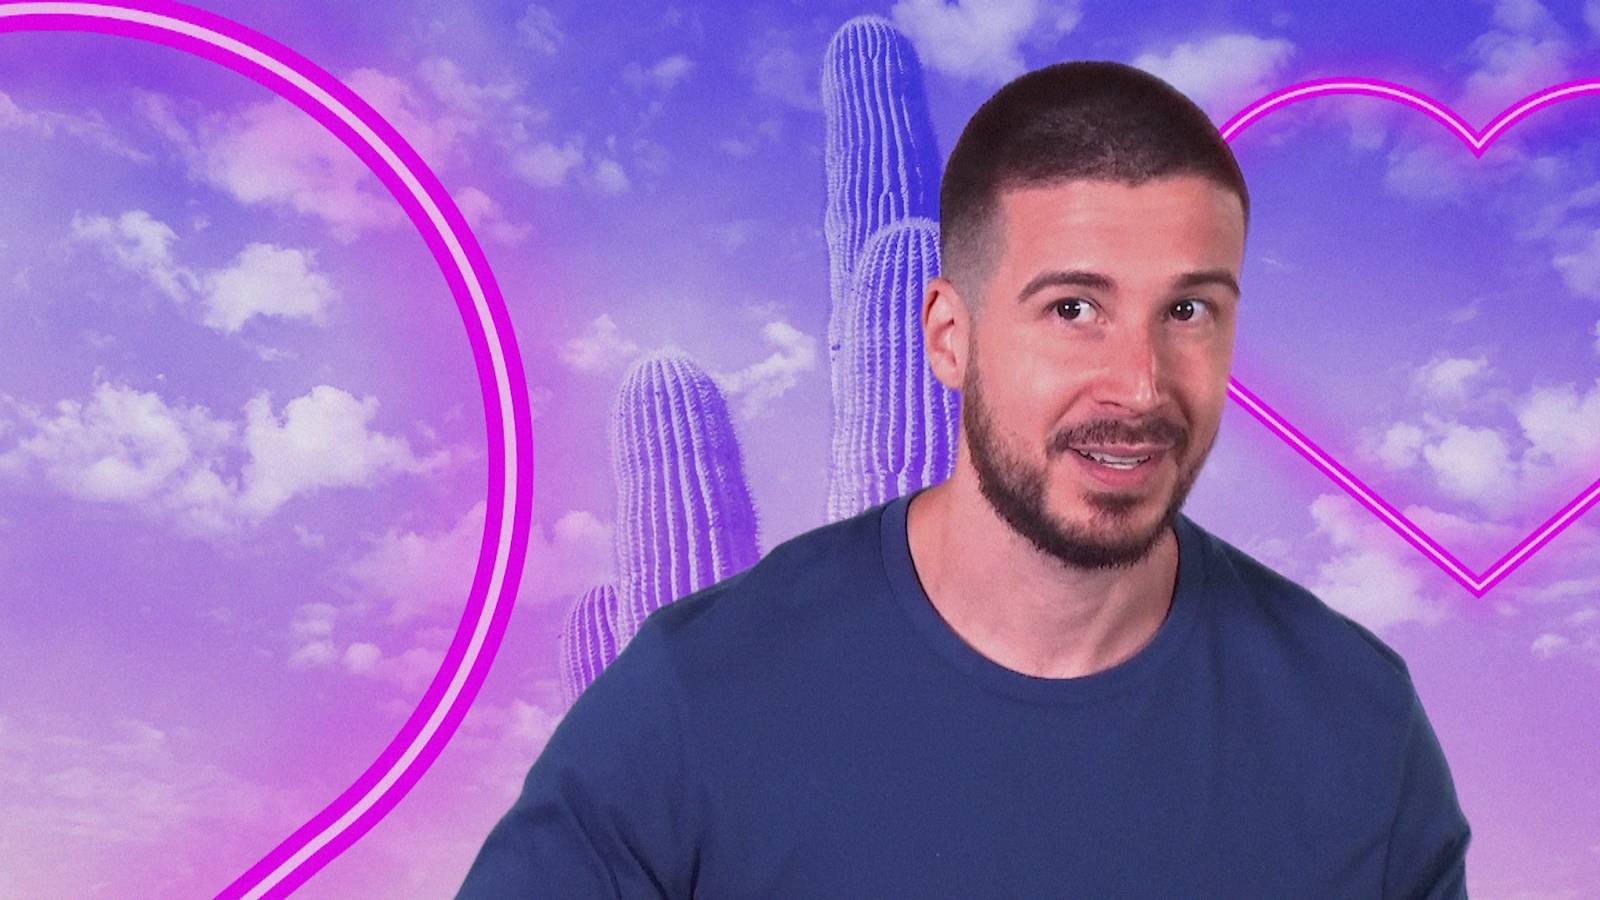 Vinny Guadagnino talks about the 'dream woman' he wants a relationship with in an interview in 'Double Shot at Love' on MTV